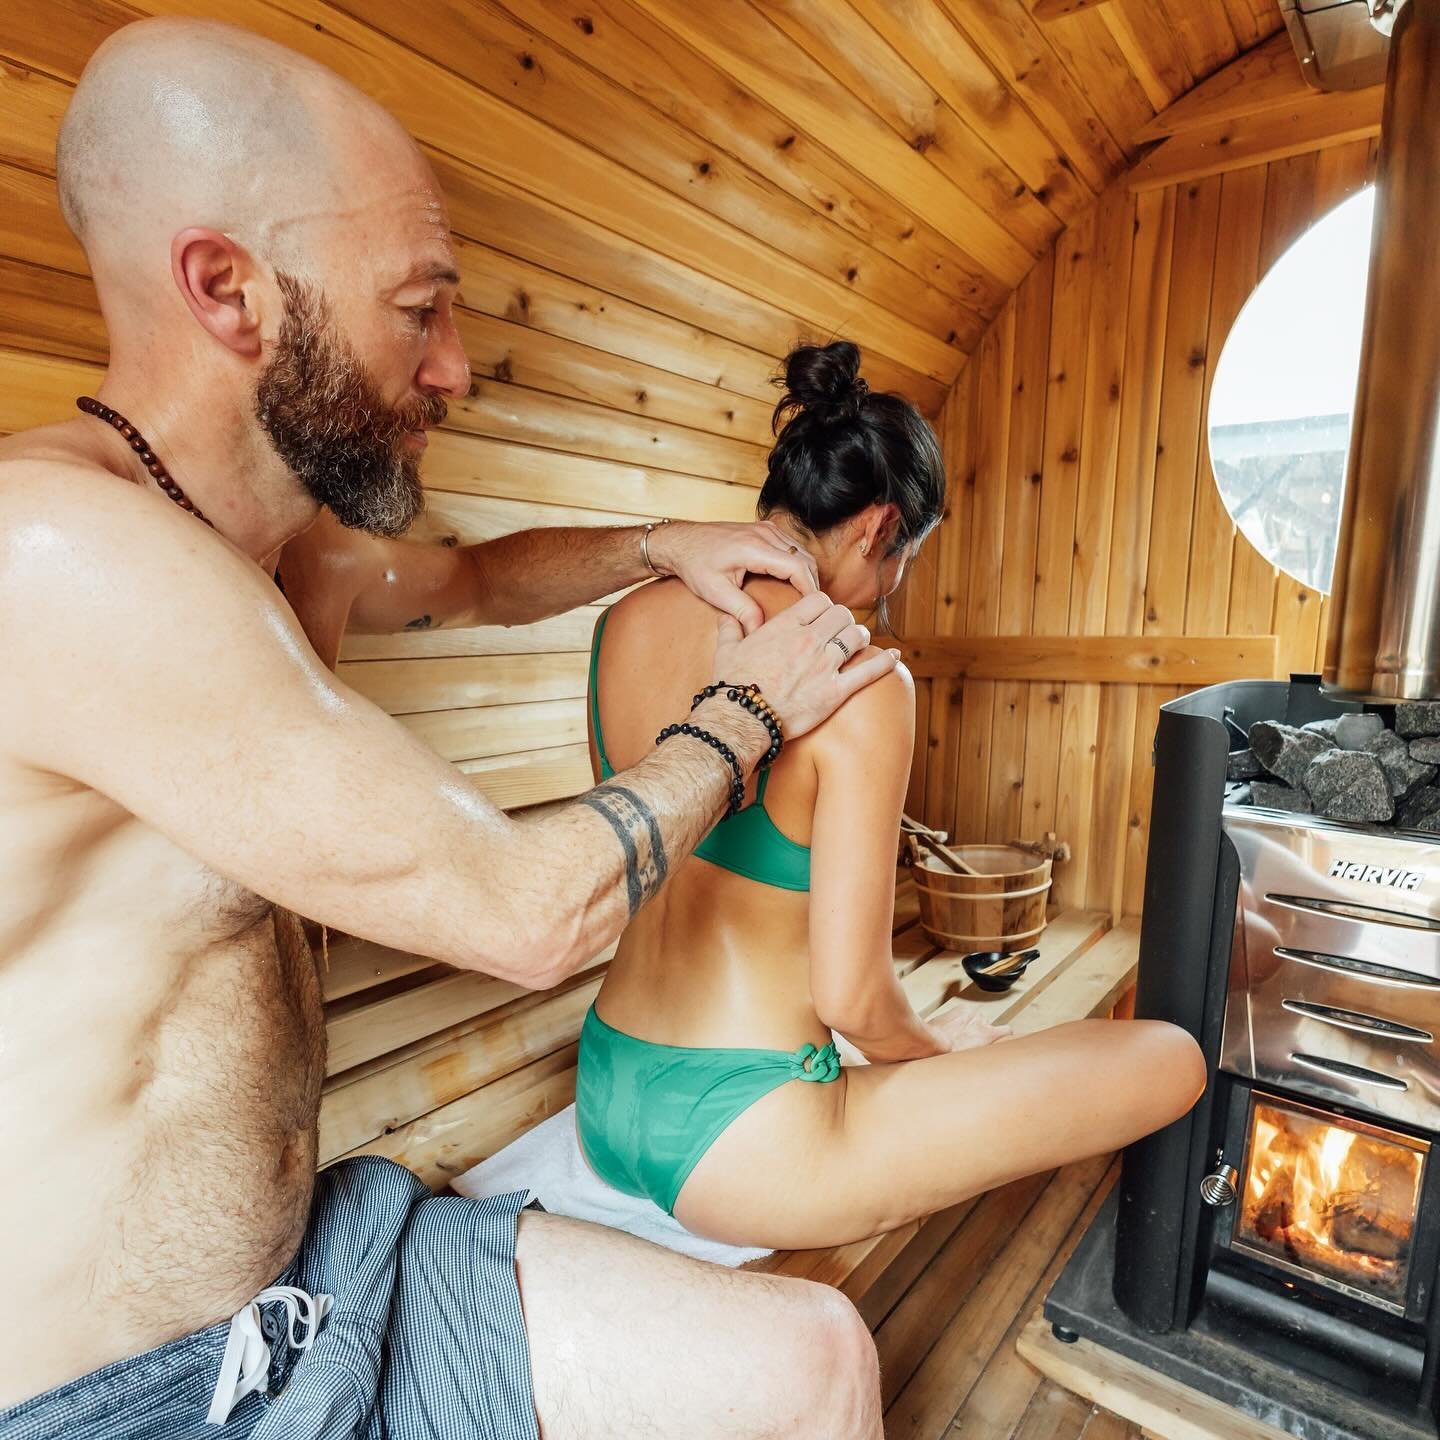 Sauna Etiquette 101 with Friends at Drip Sauna 🌟🔥 

Whether it&rsquo;s giving a soothing massage, sharing laughs, cleansing between heats, setting the mood, or gathering around the fire &mdash; every step is about enhancing the bond and the bliss. 